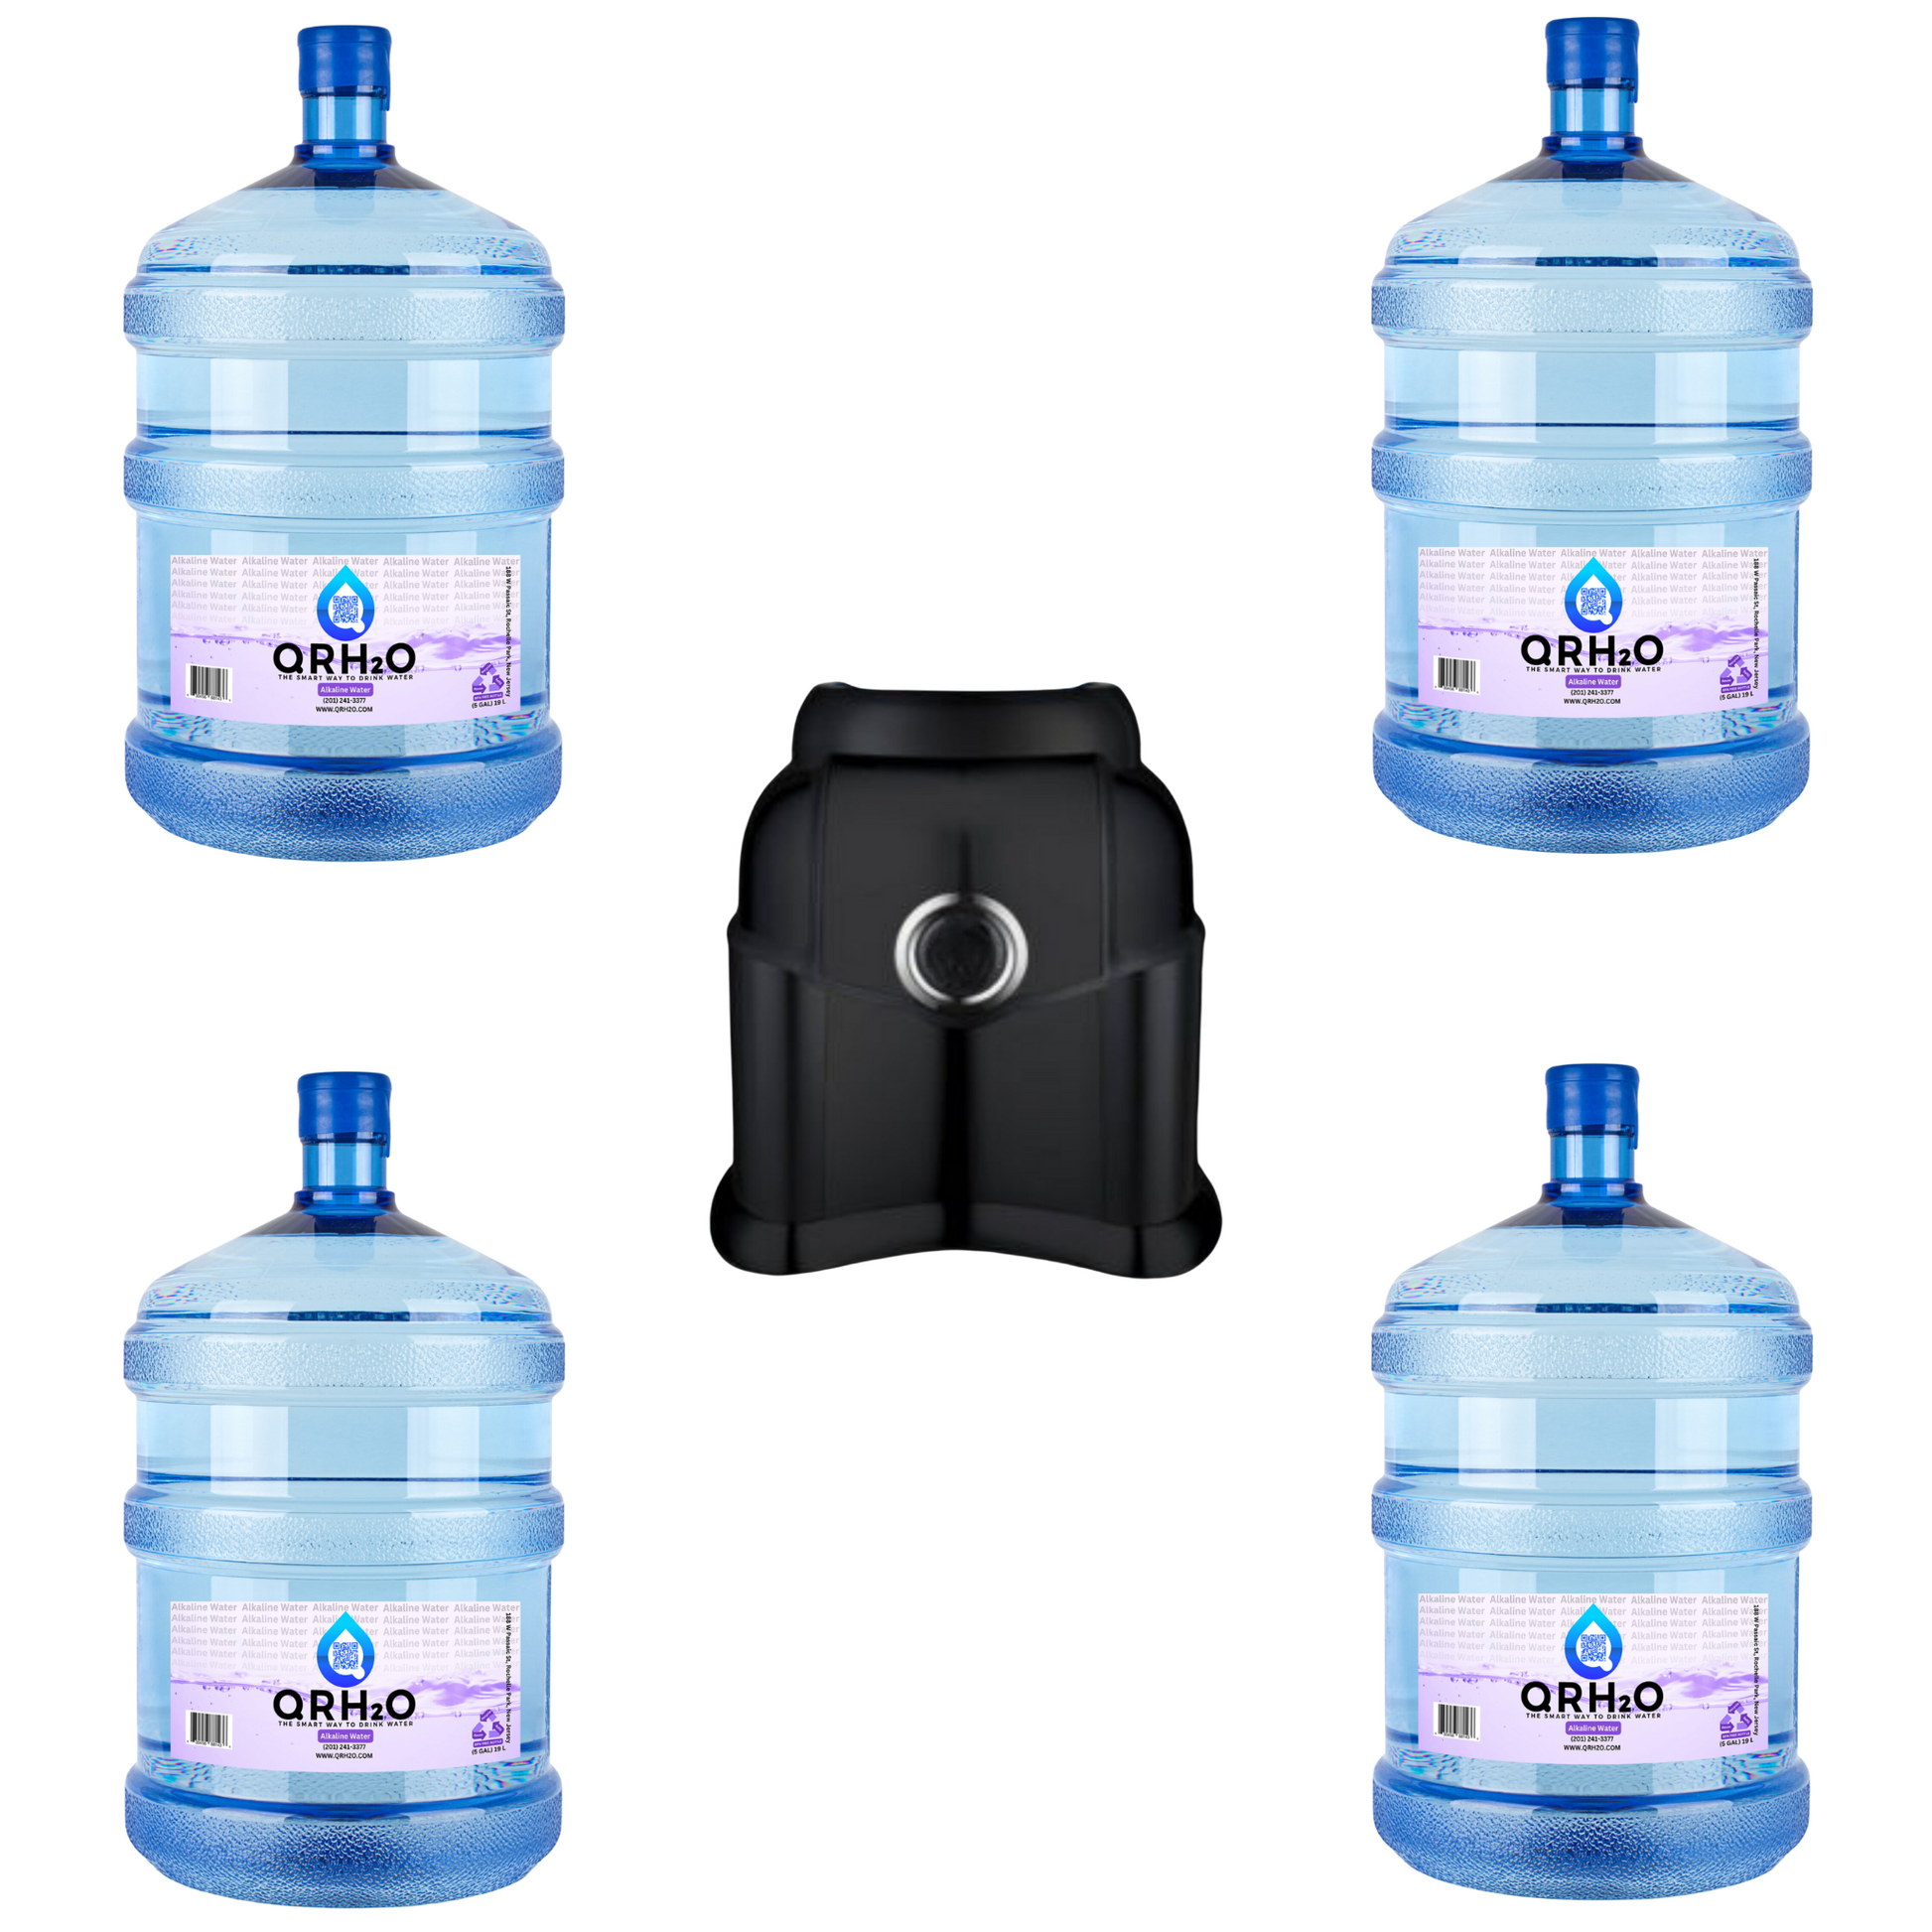 Our 4 5-gallon water bottles and countertop dispenser make it easy to stay hydrated with your choice of alkaline or purified water at room temperature.